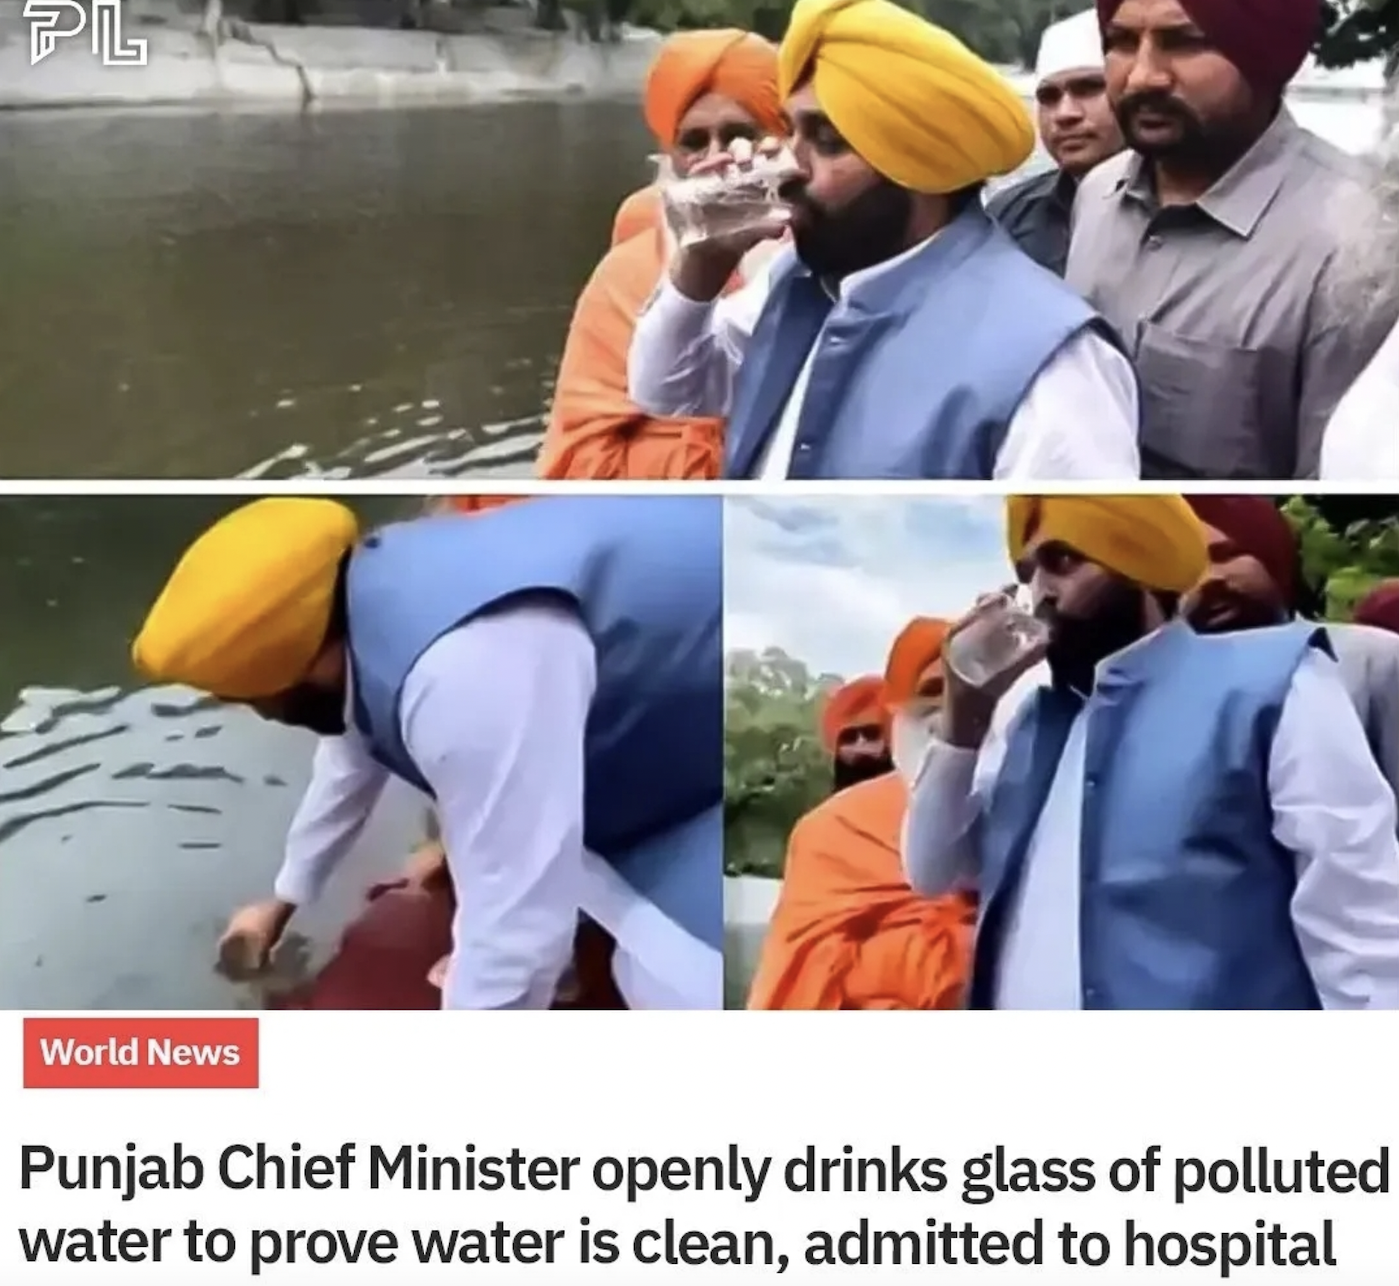 Facepalms - photo caption - Pl World News Punjab Chief Minister openly drinks glass of polluted water to prove water is clean, admitted to hospital